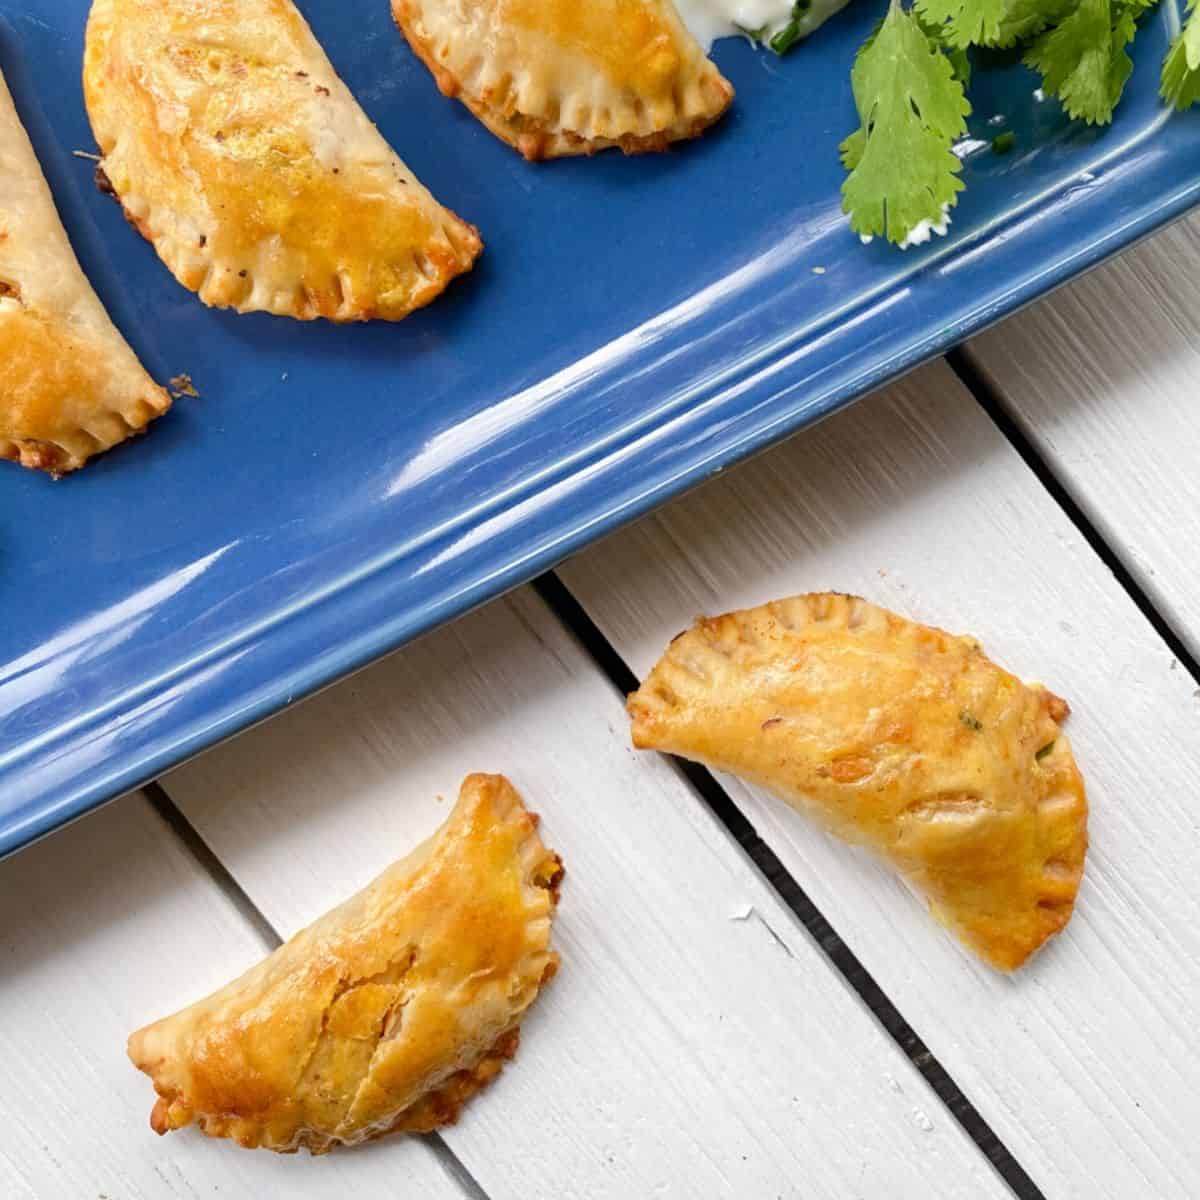 vegetarian empanadas on a blue plate and white table.